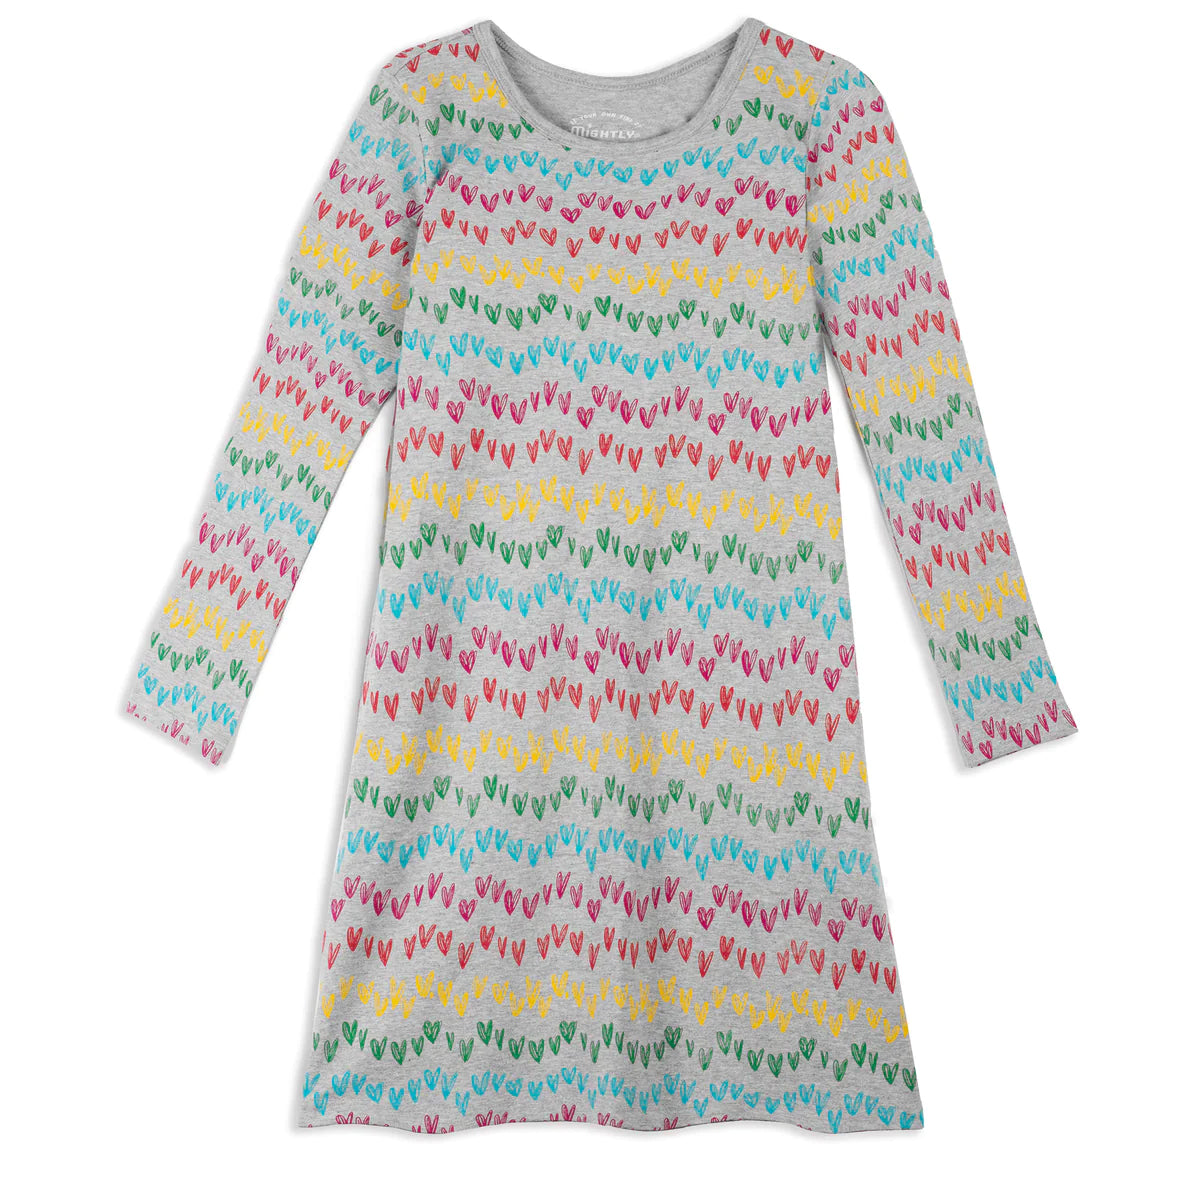 Pre-owned Rainbow Hearts Dress size: 2-5T